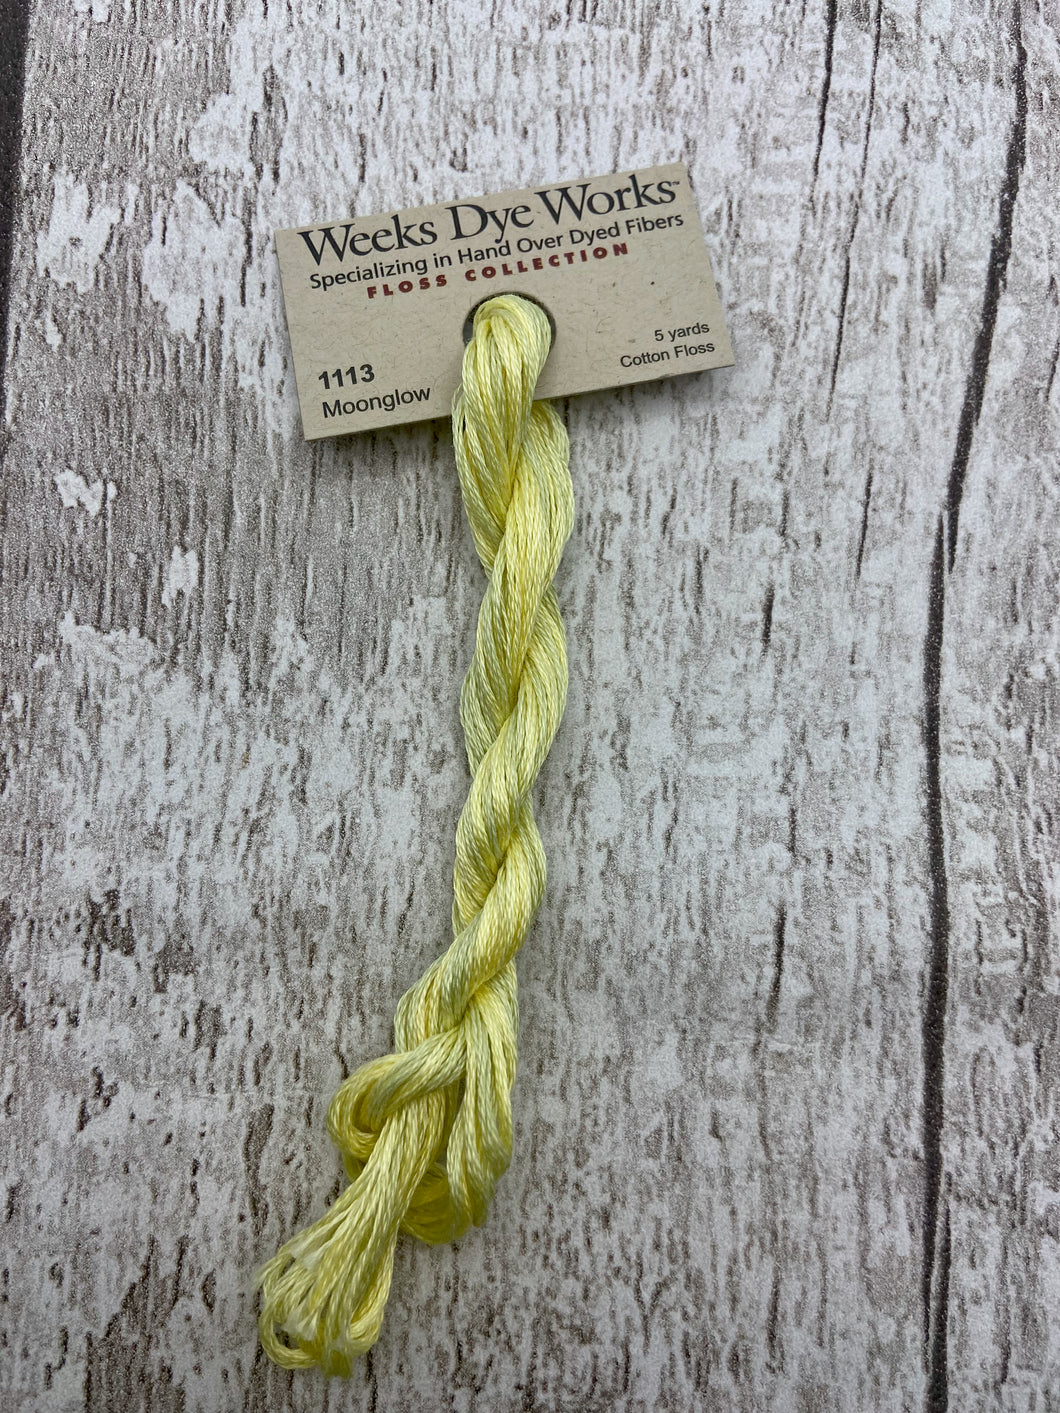 Moonglow (#1113) Weeks Dye Works 6-strand cotton floss